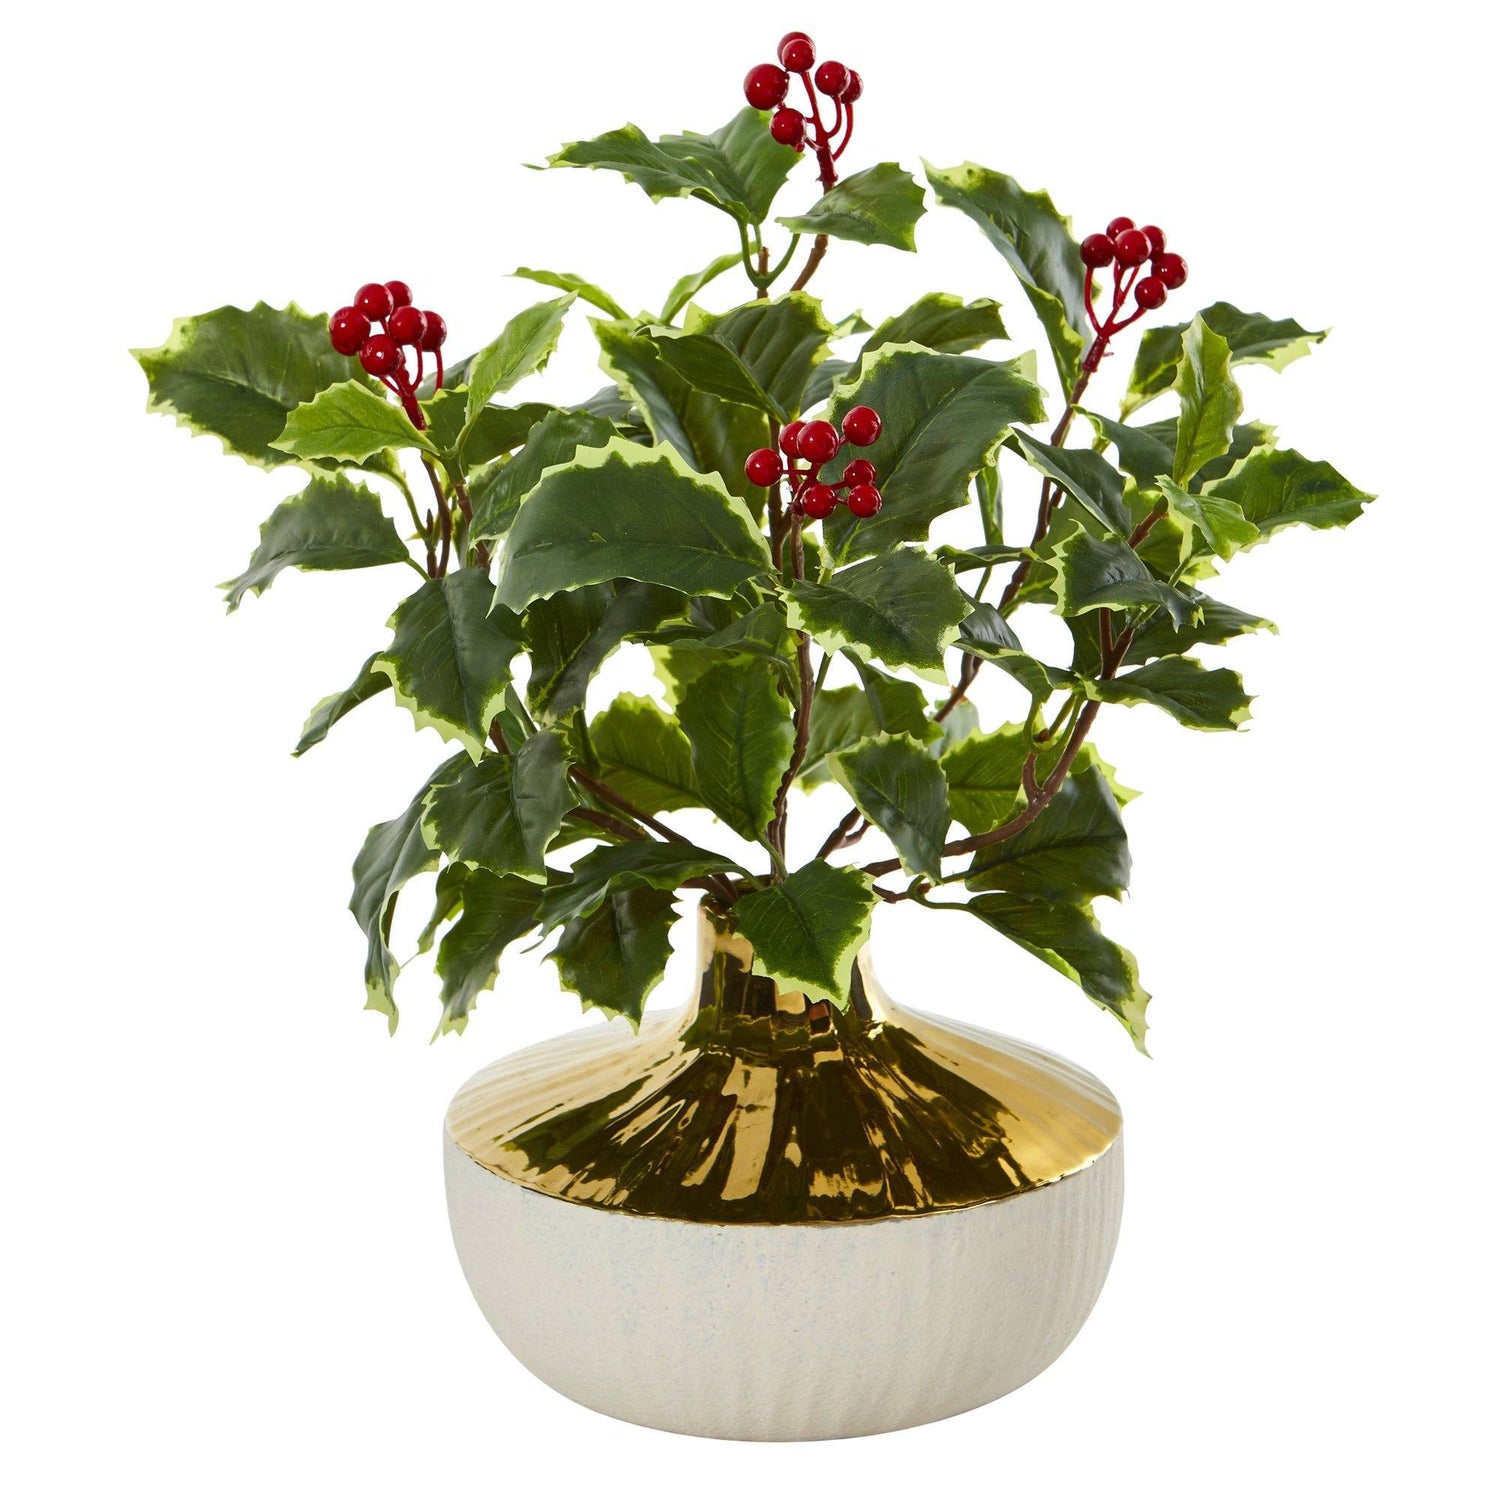 14” Variegated Holly Leaf Artificial Plant in Gold and Cream Elegant Vase (Real Touch)